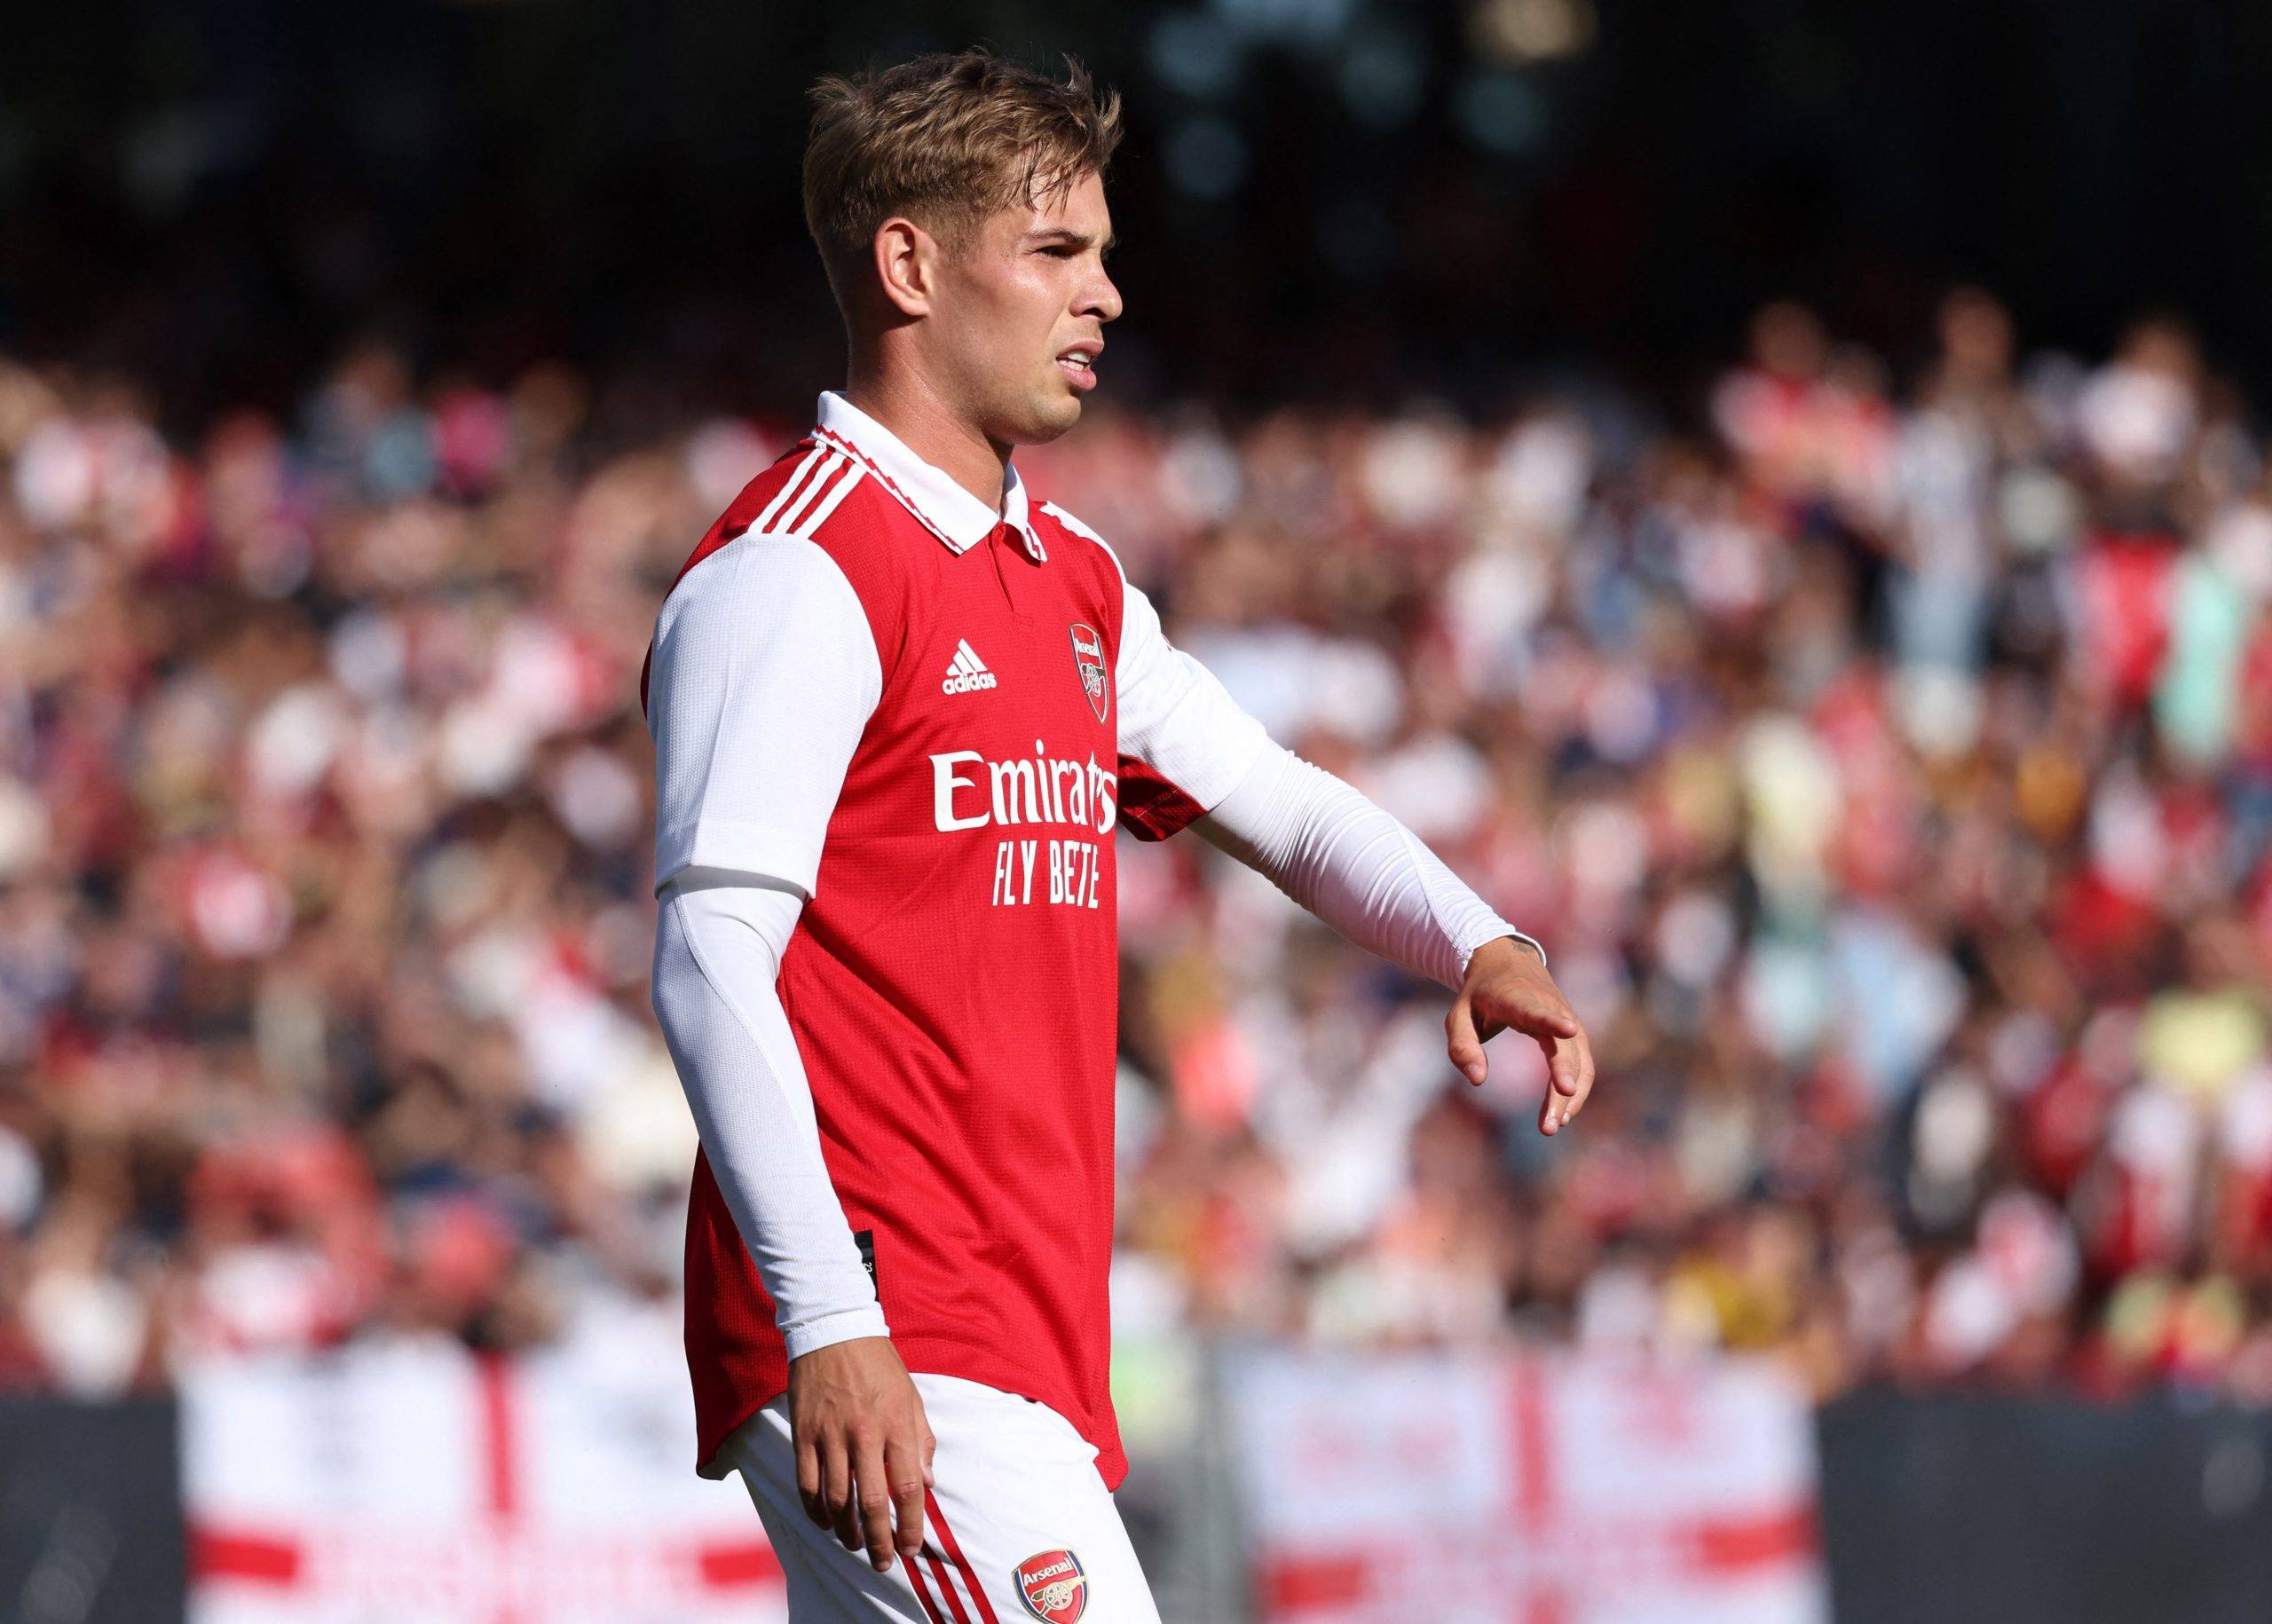 Arsenal: Reports that Emile Smith Rowe could leave 'way off the mark' - Arsenal News